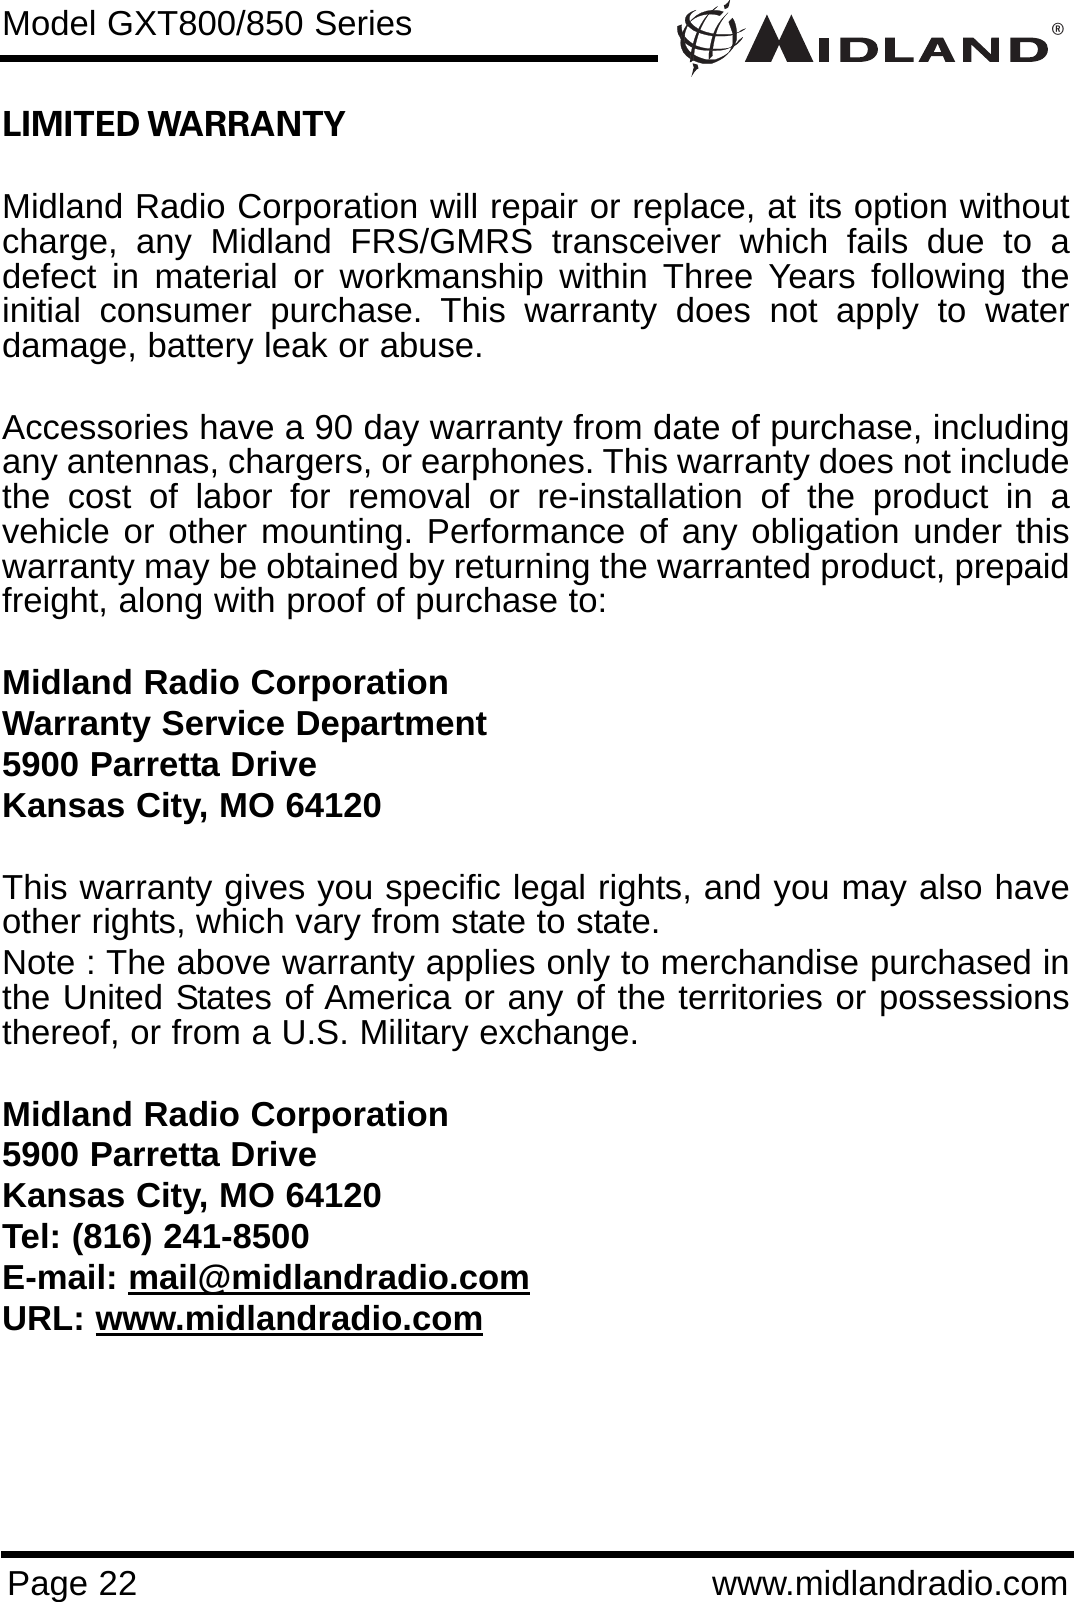 ®Page 22 www.midlandradio.comLIMITED WARRANTY Midland Radio Corporation will repair or replace, at its option withoutcharge, any Midland FRS/GMRS transceiver which fails due to adefect in material or workmanship within Three Years following theinitial consumer purchase. This warranty does not apply to waterdamage, battery leak or abuse.Accessories have a 90 day warranty from date of purchase, includingany antennas, chargers, or earphones. This warranty does not includethe cost of labor for removal or re-installation of the product in avehicle or other mounting. Performance of any obligation under thiswarranty may be obtained by returning the warranted product, prepaidfreight, along with proof of purchase to:Midland Radio CorporationWarranty Service Department5900 Parretta DriveKansas City, MO 64120This warranty gives you specific legal rights, and you may also haveother rights, which vary from state to state.Note : The above warranty applies only to merchandise purchased inthe United States of America or any of the territories or possessionsthereof, or from a U.S. Military exchange.Midland Radio Corporation5900 Parretta DriveKansas City, MO 64120Tel: (816) 241-8500E-mail: mail@midlandradio.comURL: www.midlandradio.comModel GXT800/850 Series